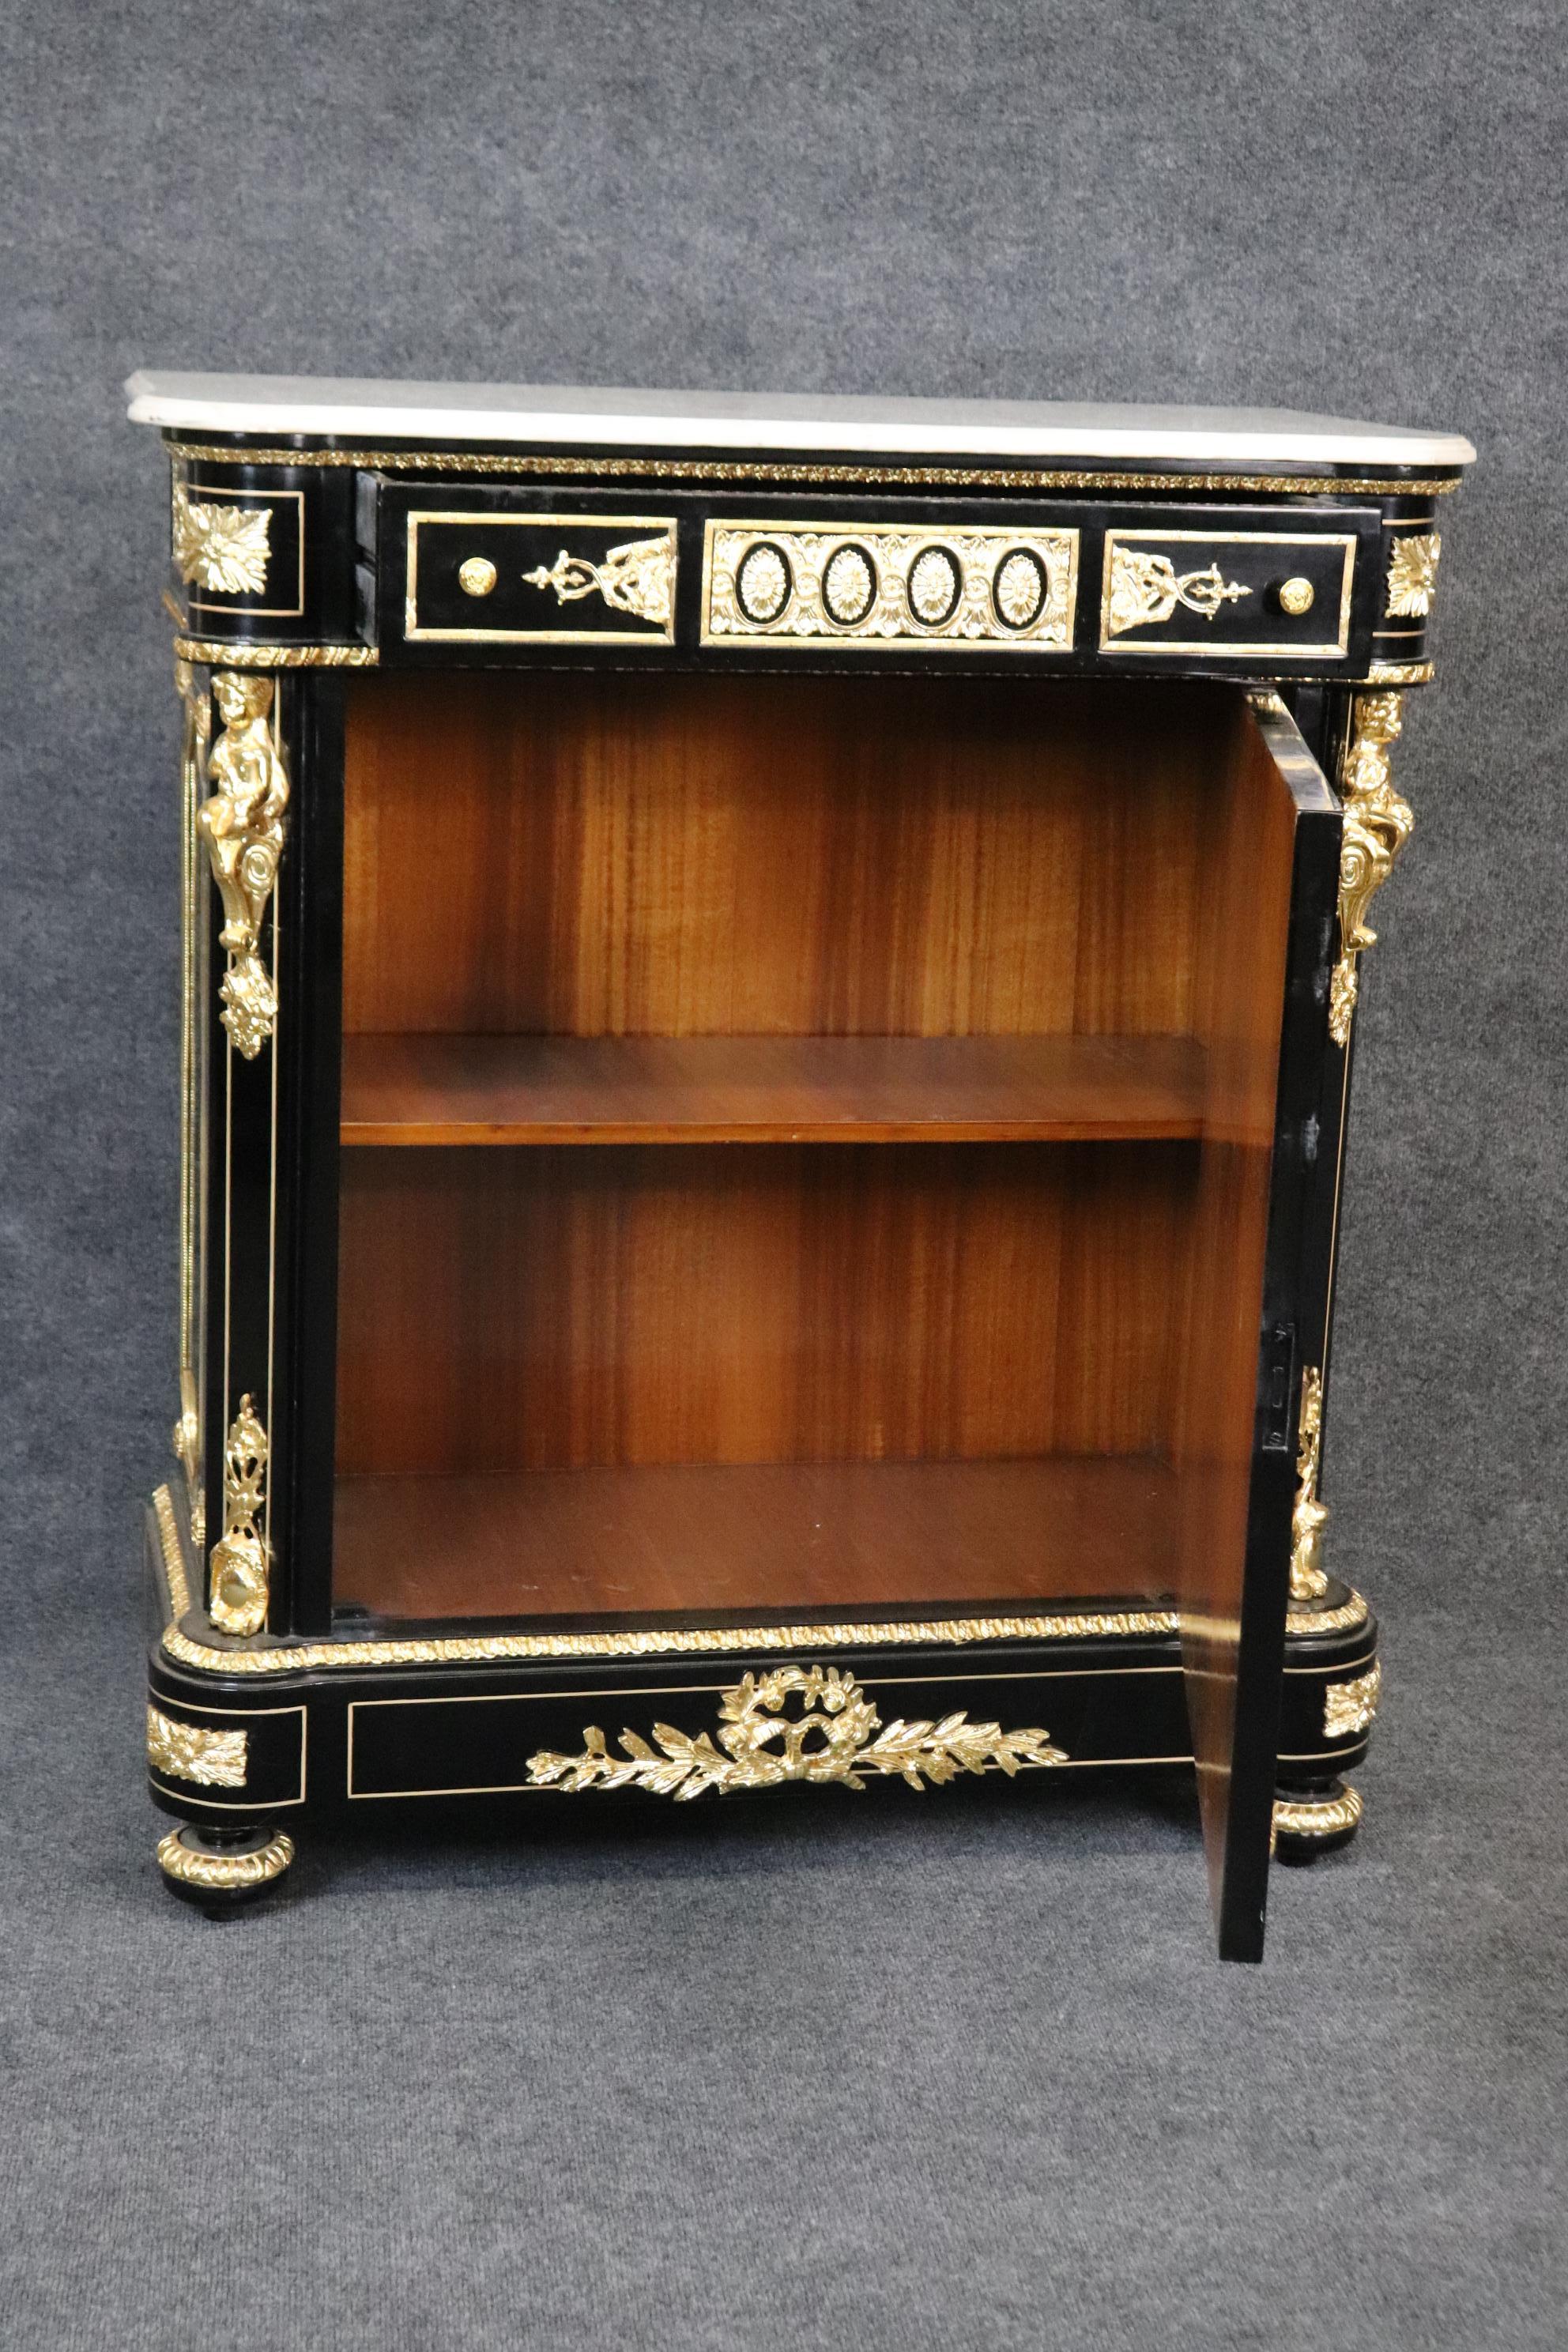 This is a gorgeous black lacquered or ebonized side cabinet in the Napoleonic style. The cabinet features beautiful bright brass castings of cherubs and figures and various other forms of ormolu. The cabinet Measures 44.5 tall x 38.75 wide x 17.5